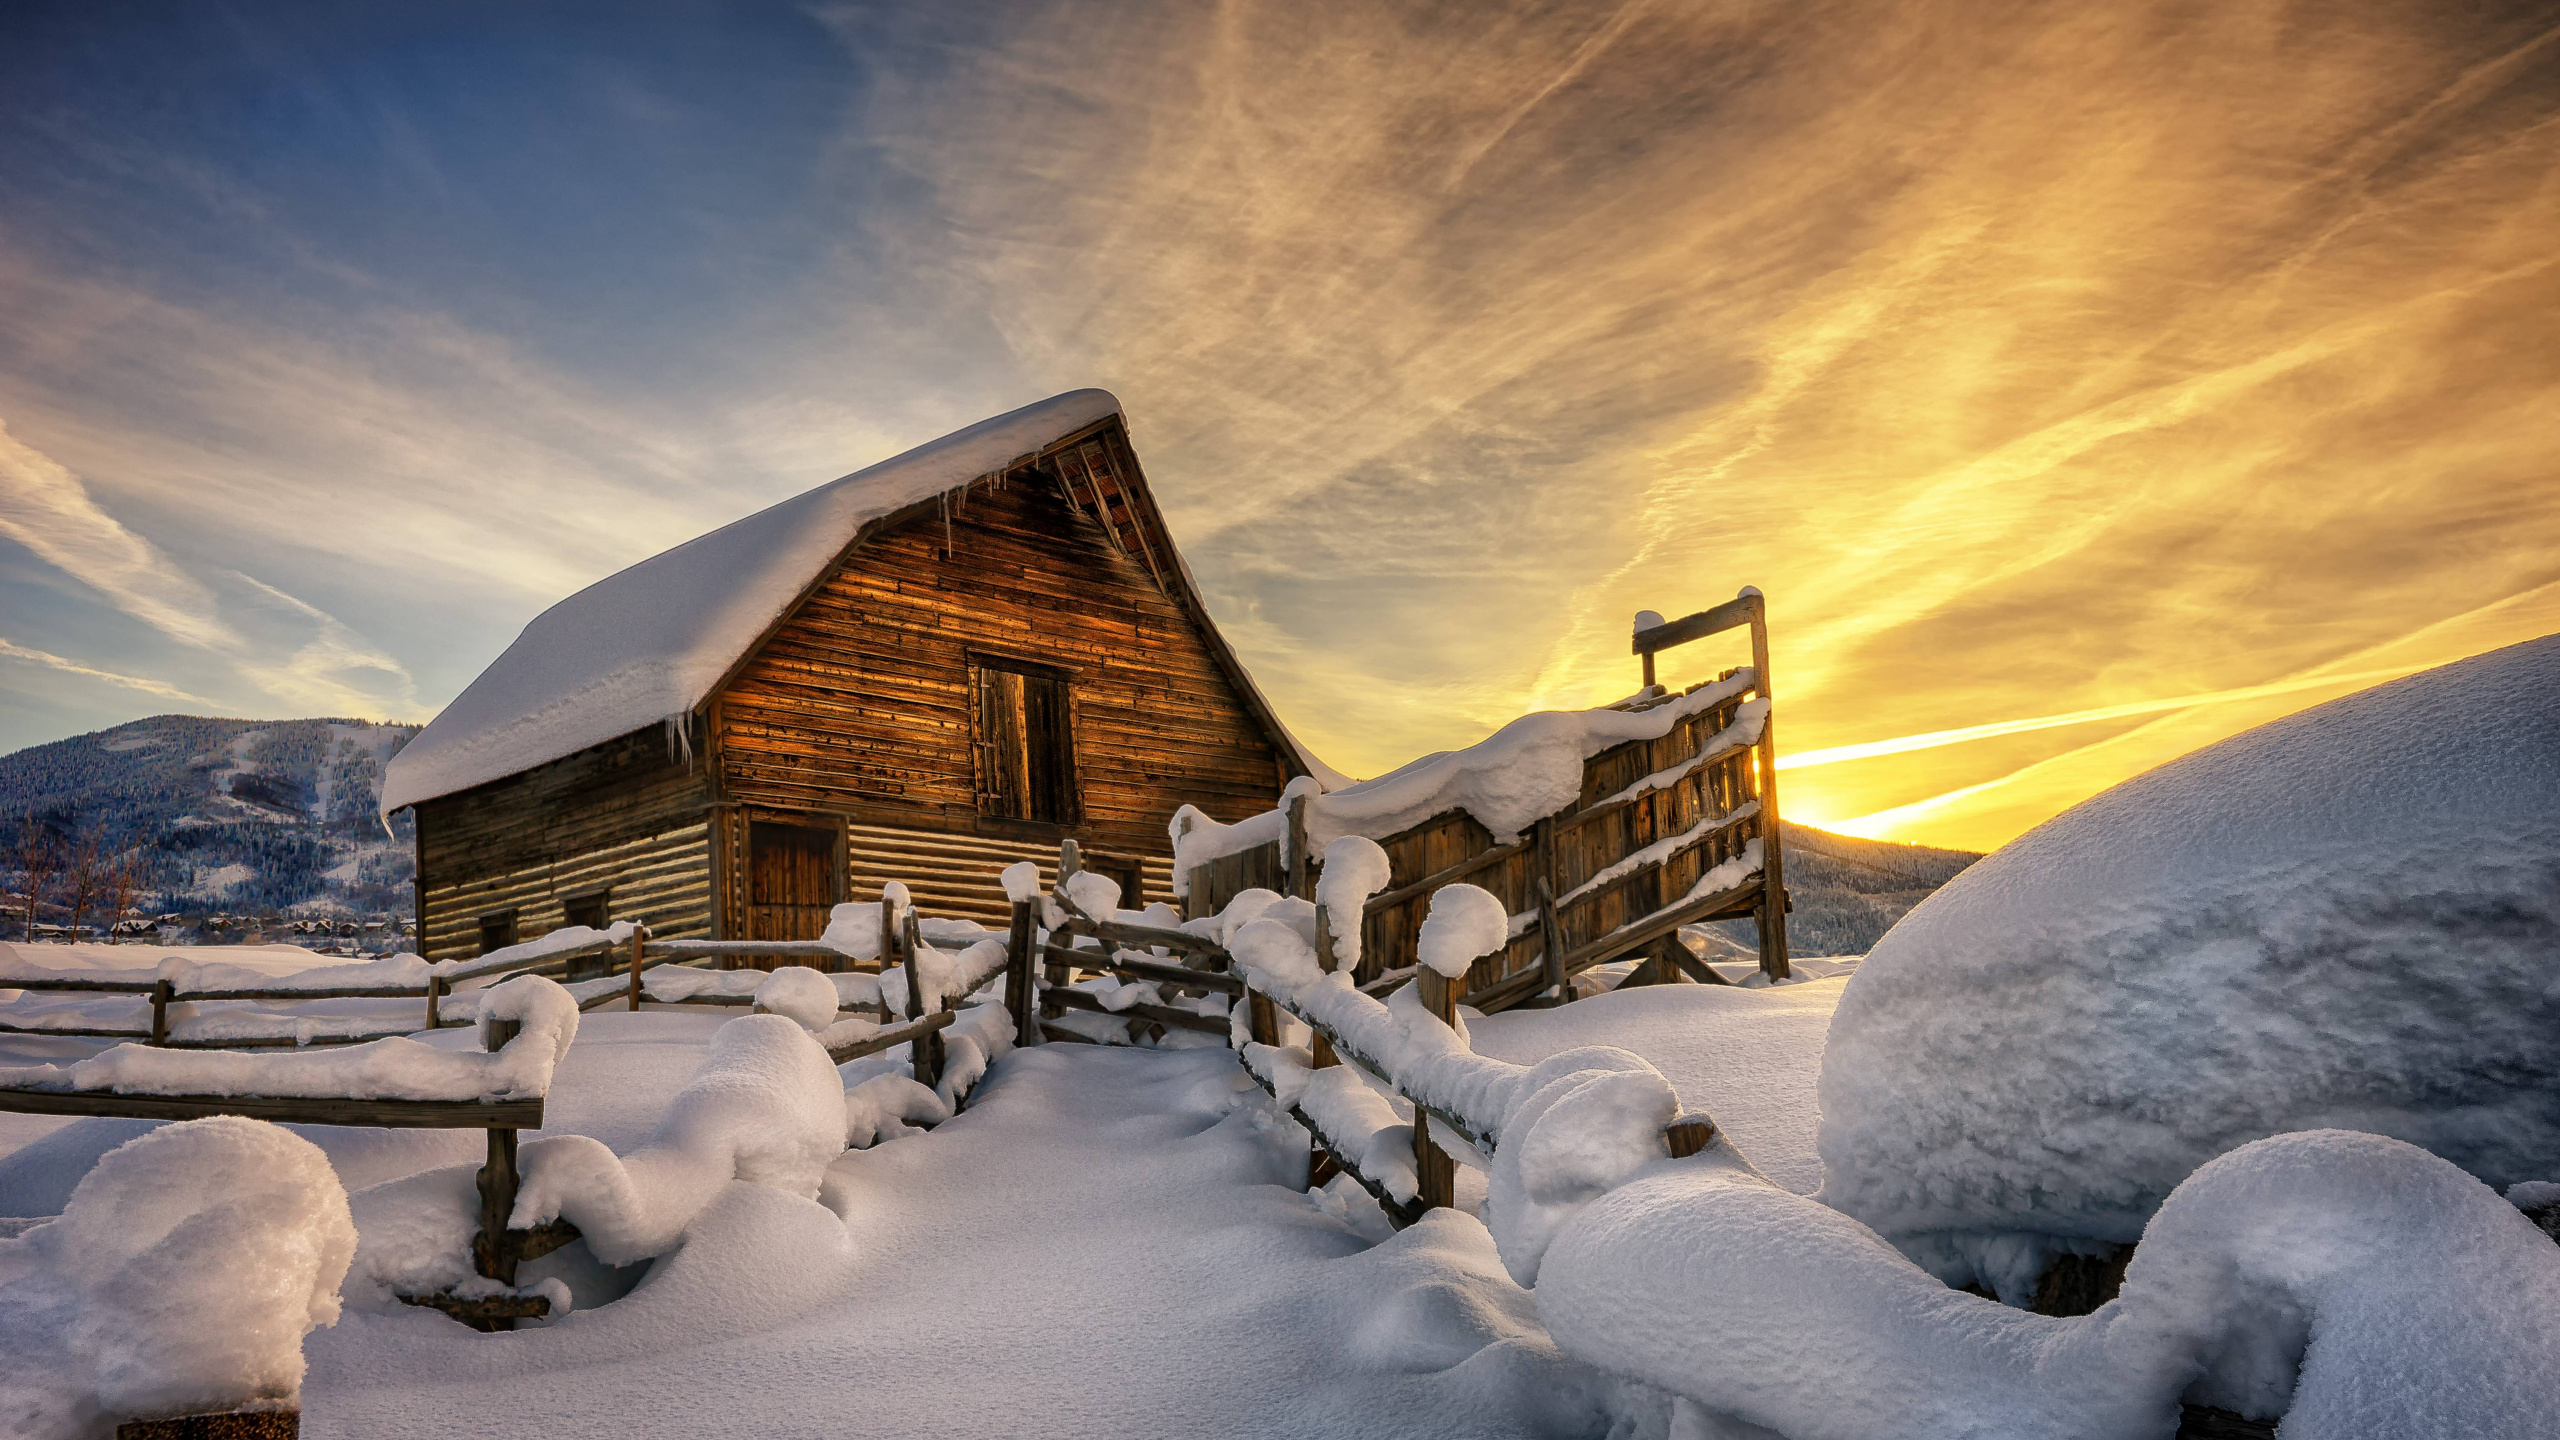 Brown Wooden House Covered by Snow Under Cloudy Sky. Wallpaper in 2560x1440 Resolution